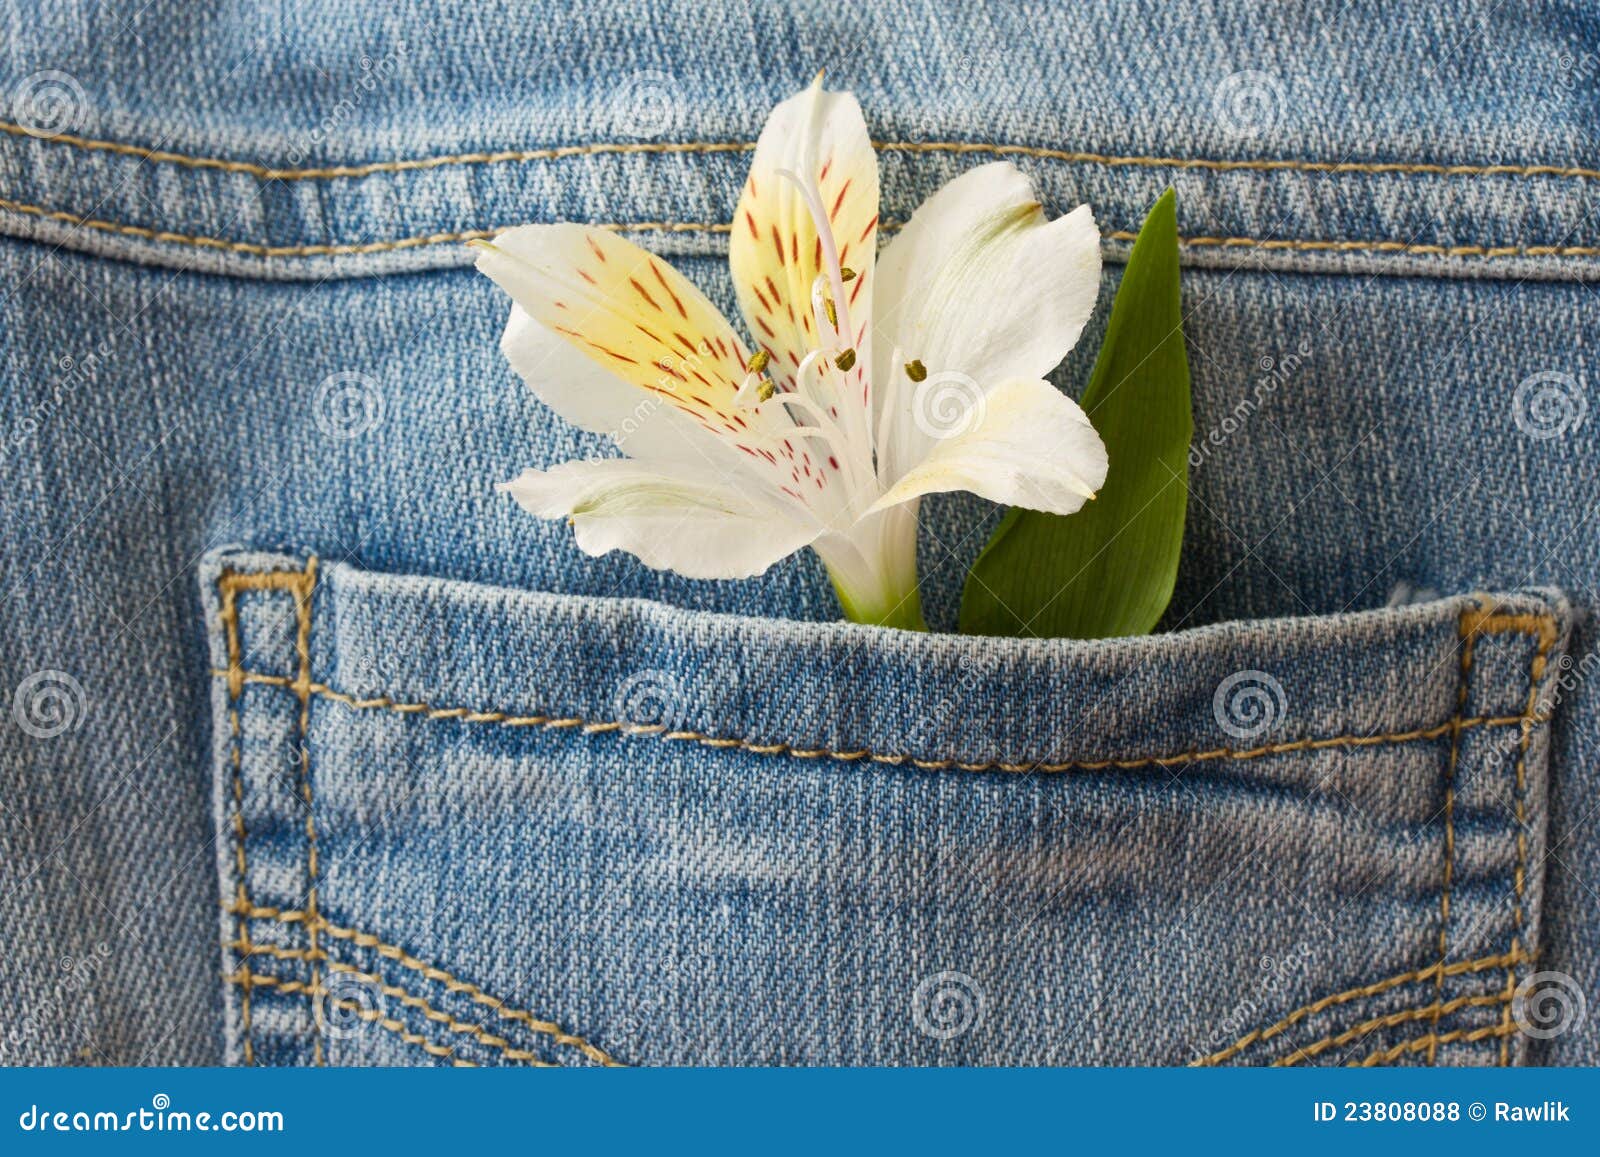 Flower and a Declaration of Love Stock Photo - Image of alstroemeria ...